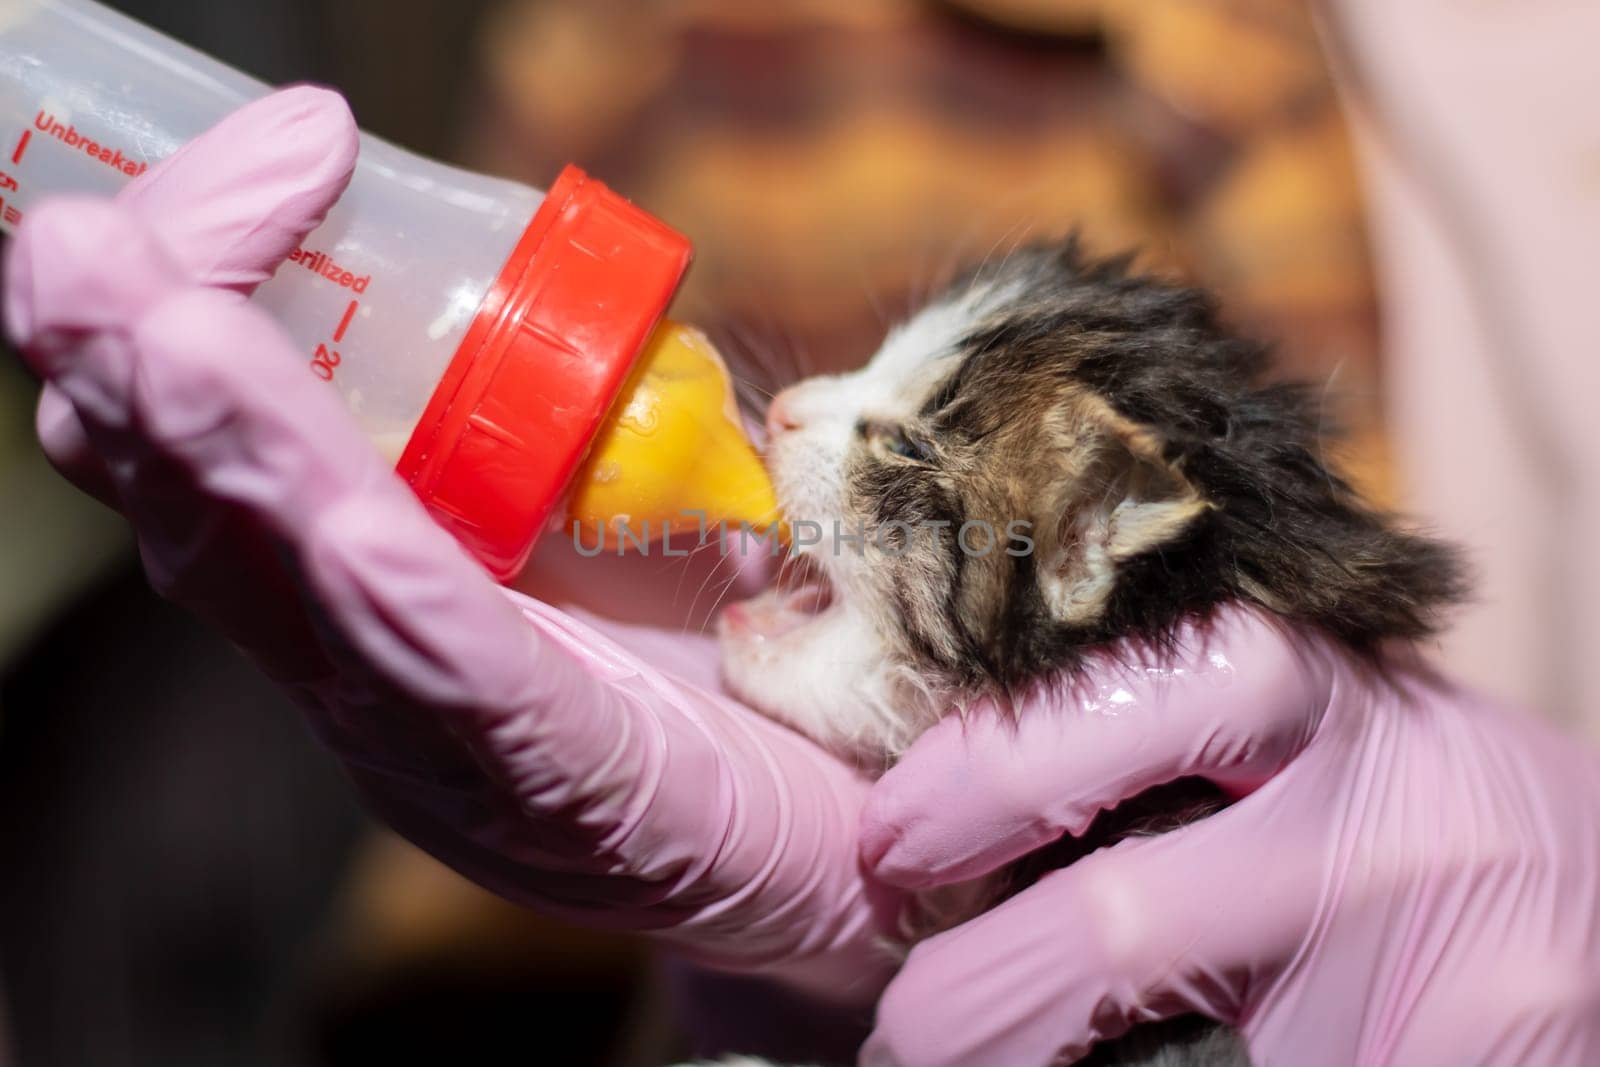 A person clad in pink gloves is bottlefeeding a tiny kitten, a member of the Felidae family, showcasing a nurturing gesture towards the small carnivorous vertebrate with whiskers and a snout